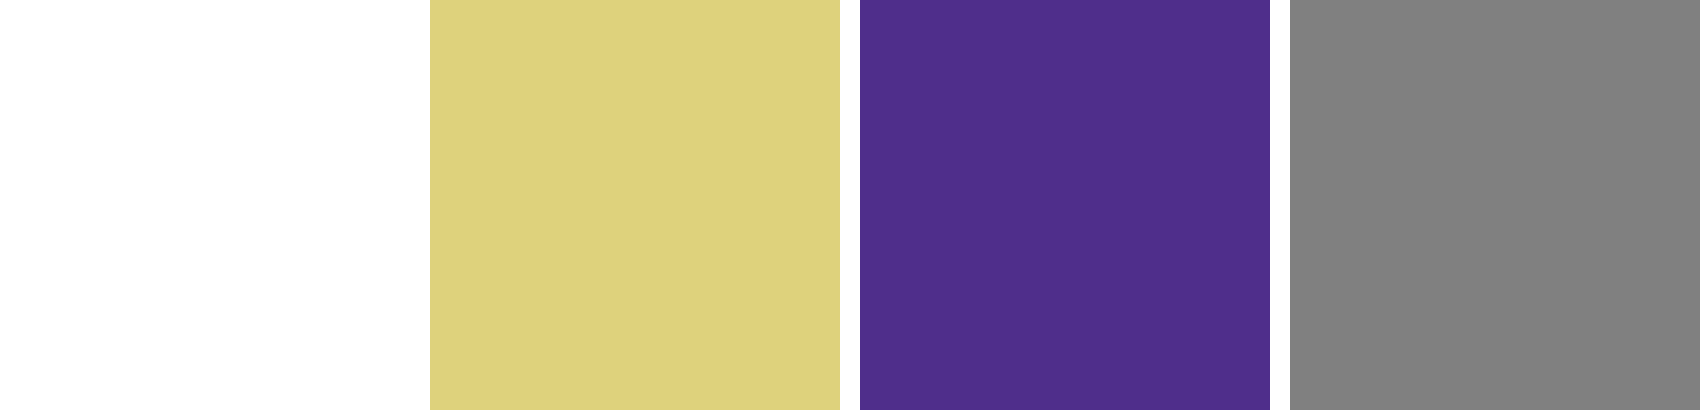 Defiance College Yellow Jackets Color Palette Image